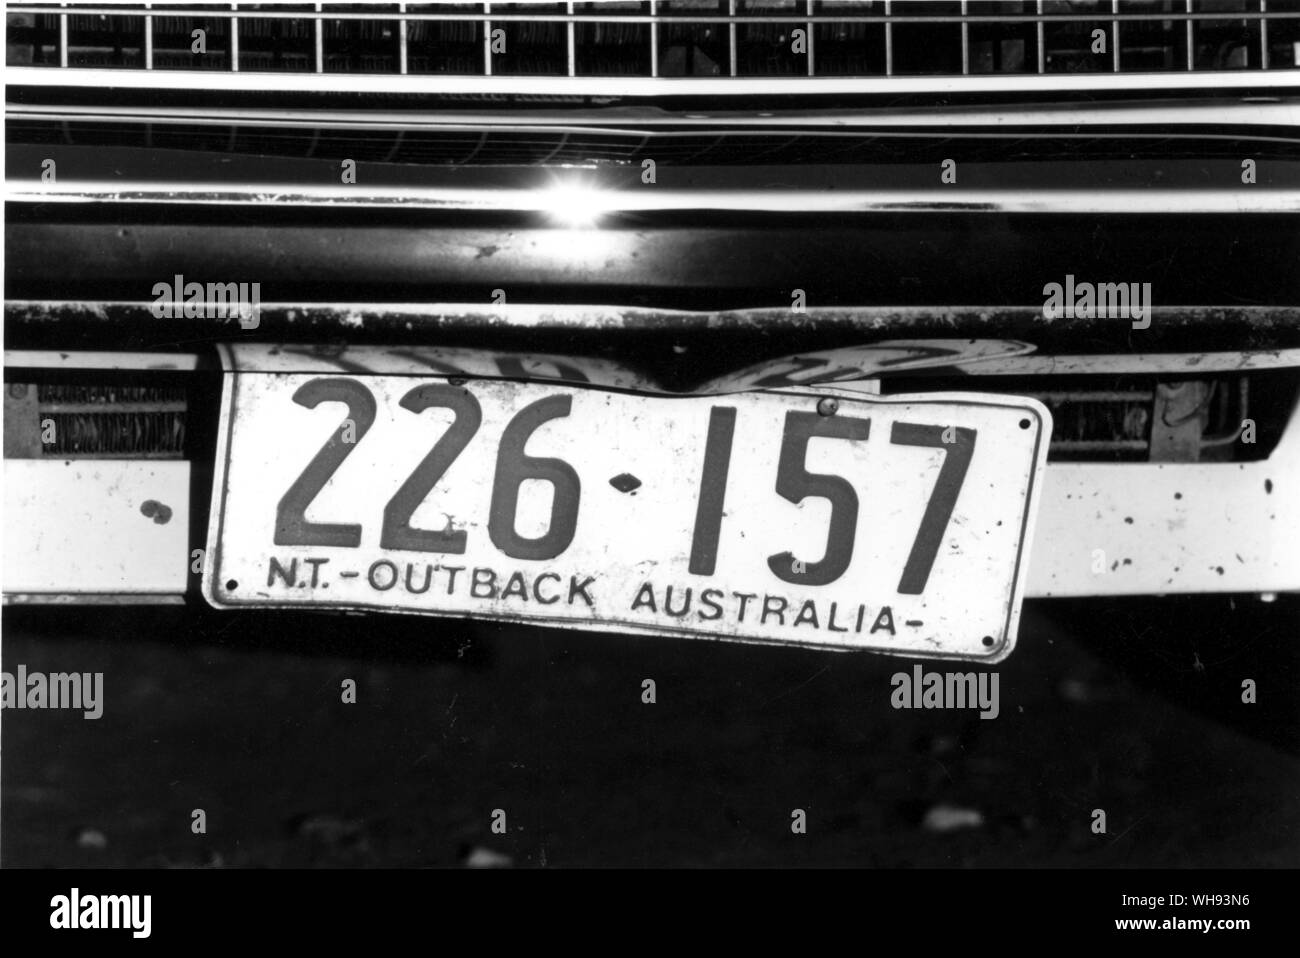 Number Plate of Northern Territory Australia Stock Photo